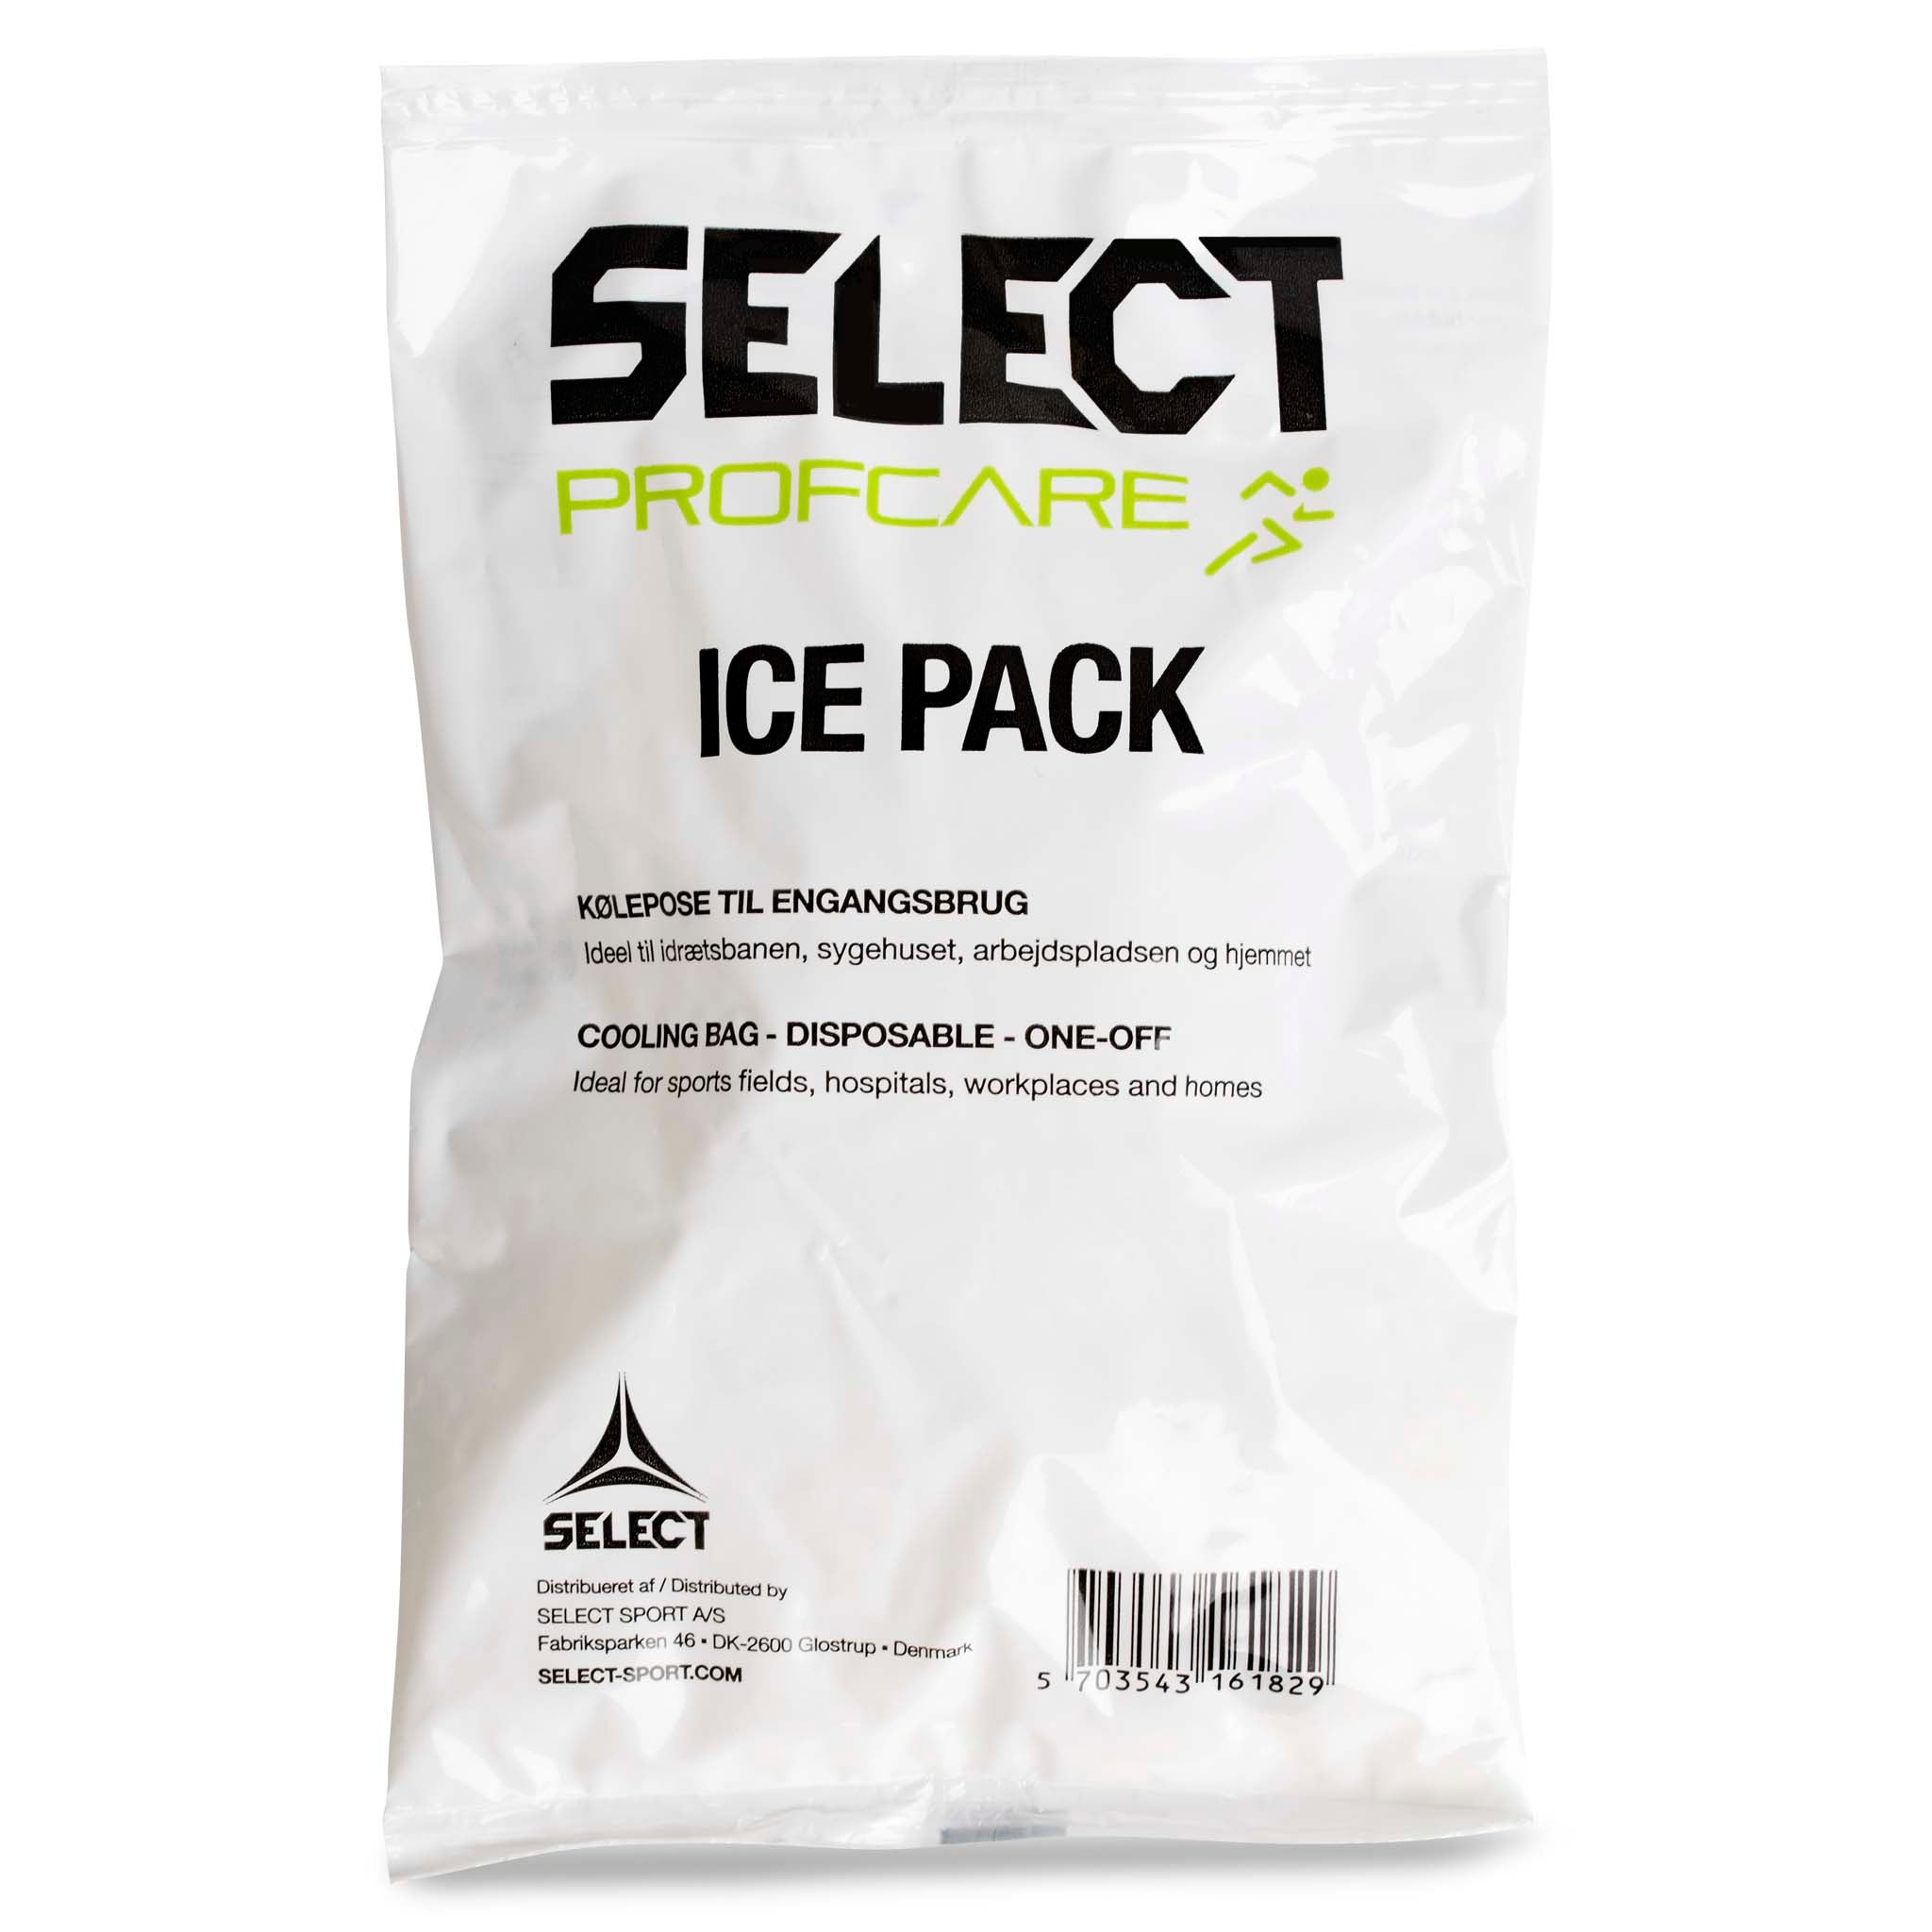 Ice pack 2-pack